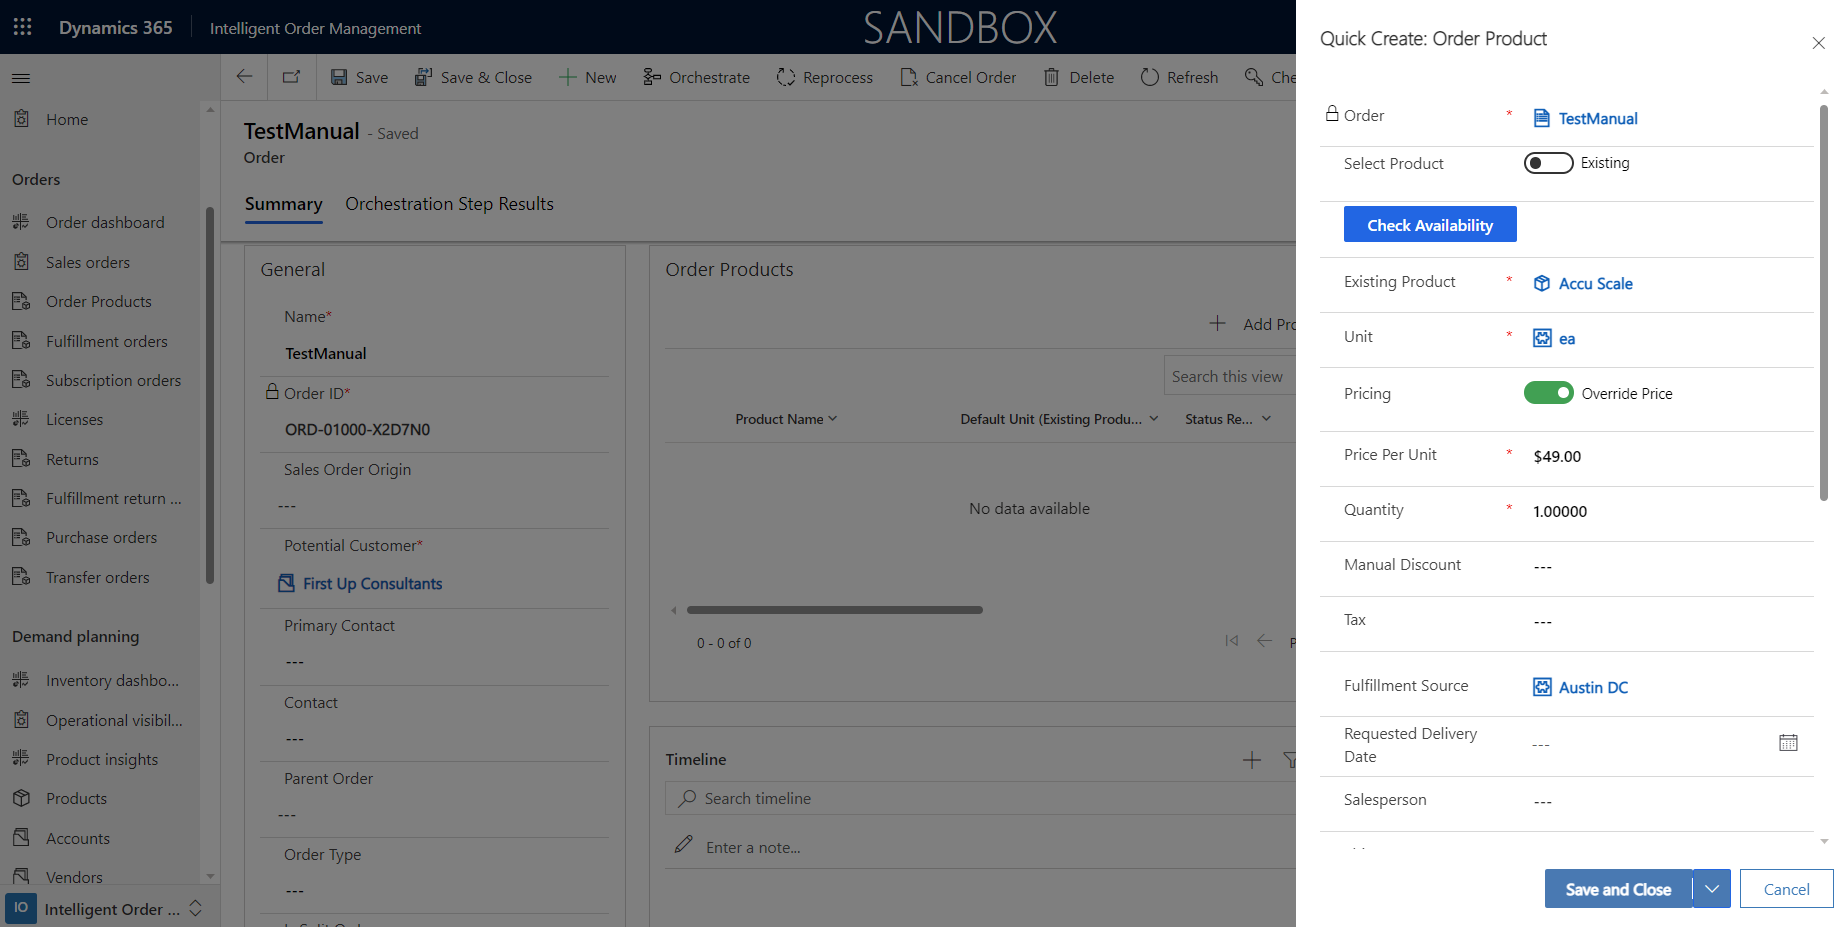 Quick Create: Order Product dialog box.